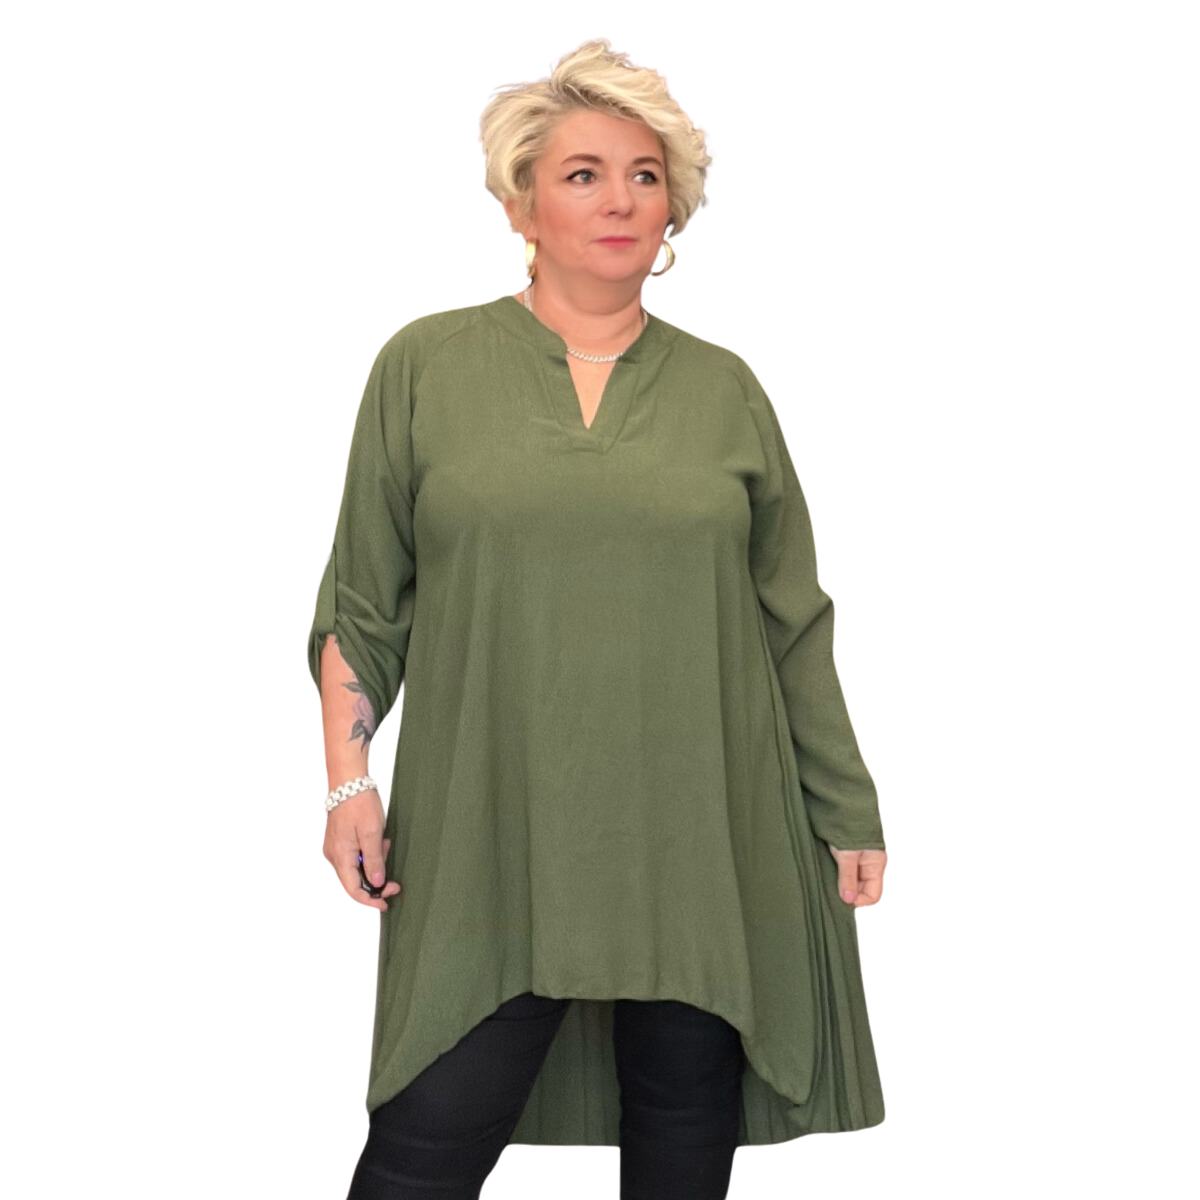 OVERSIZED LONG DIPPED HEM SHIRT / BLOUSE WITH PLEATED BACK